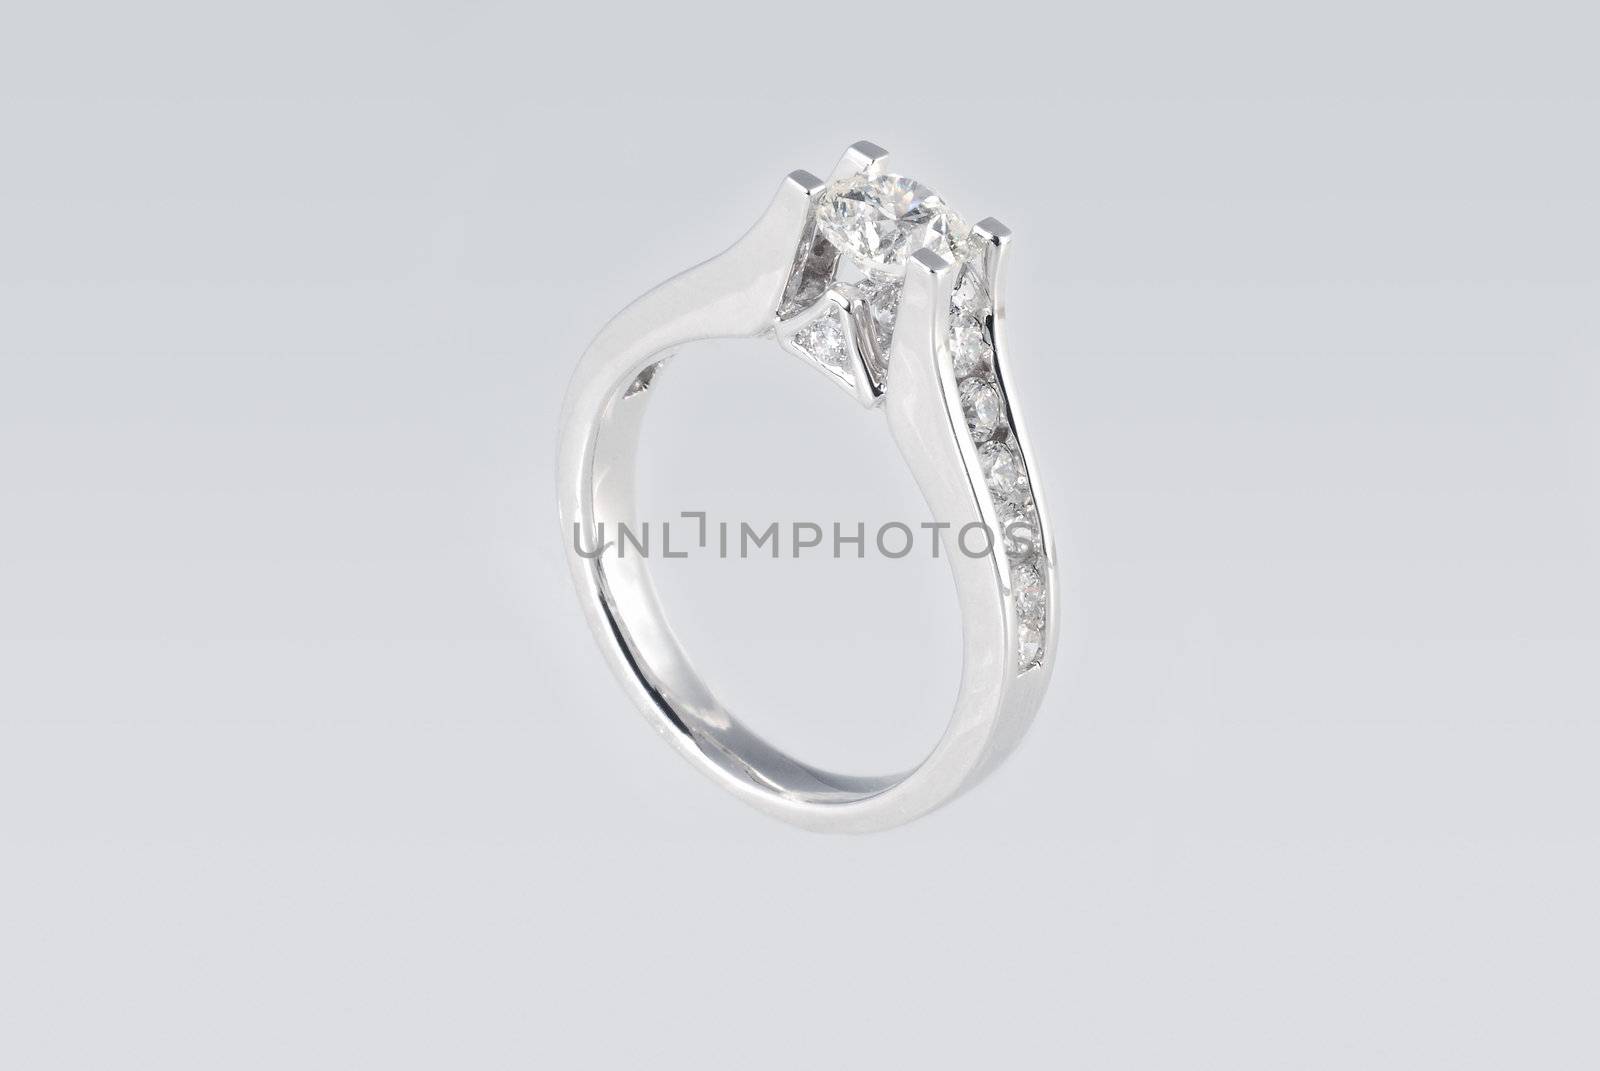 Platinum ring with diamonds over white background